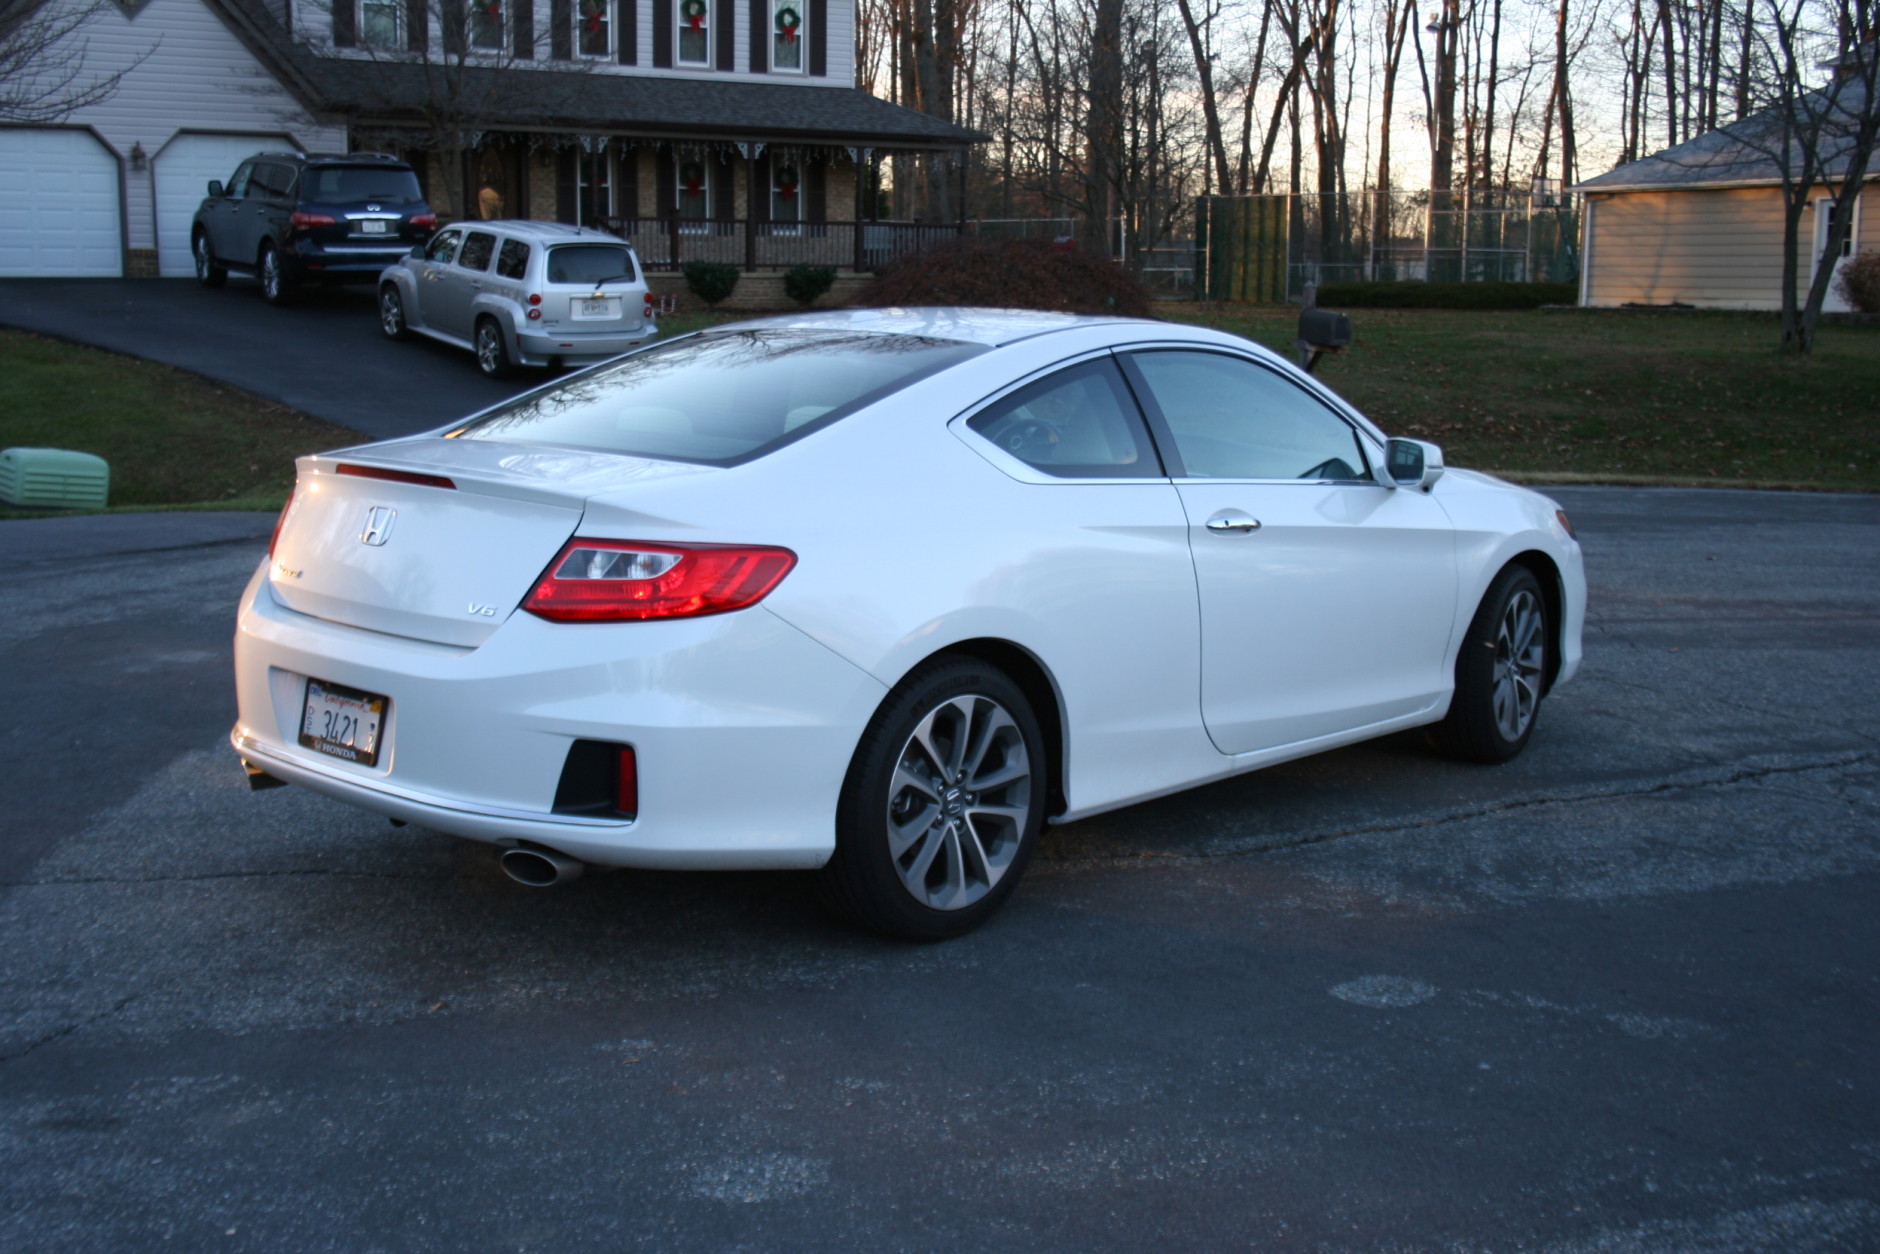 Mike Parris says the Honda continues to make a comfortable two-door coupe with a smooth V6, an optional manual transmission at a reasonable price. (WTOP/Mike Parris)